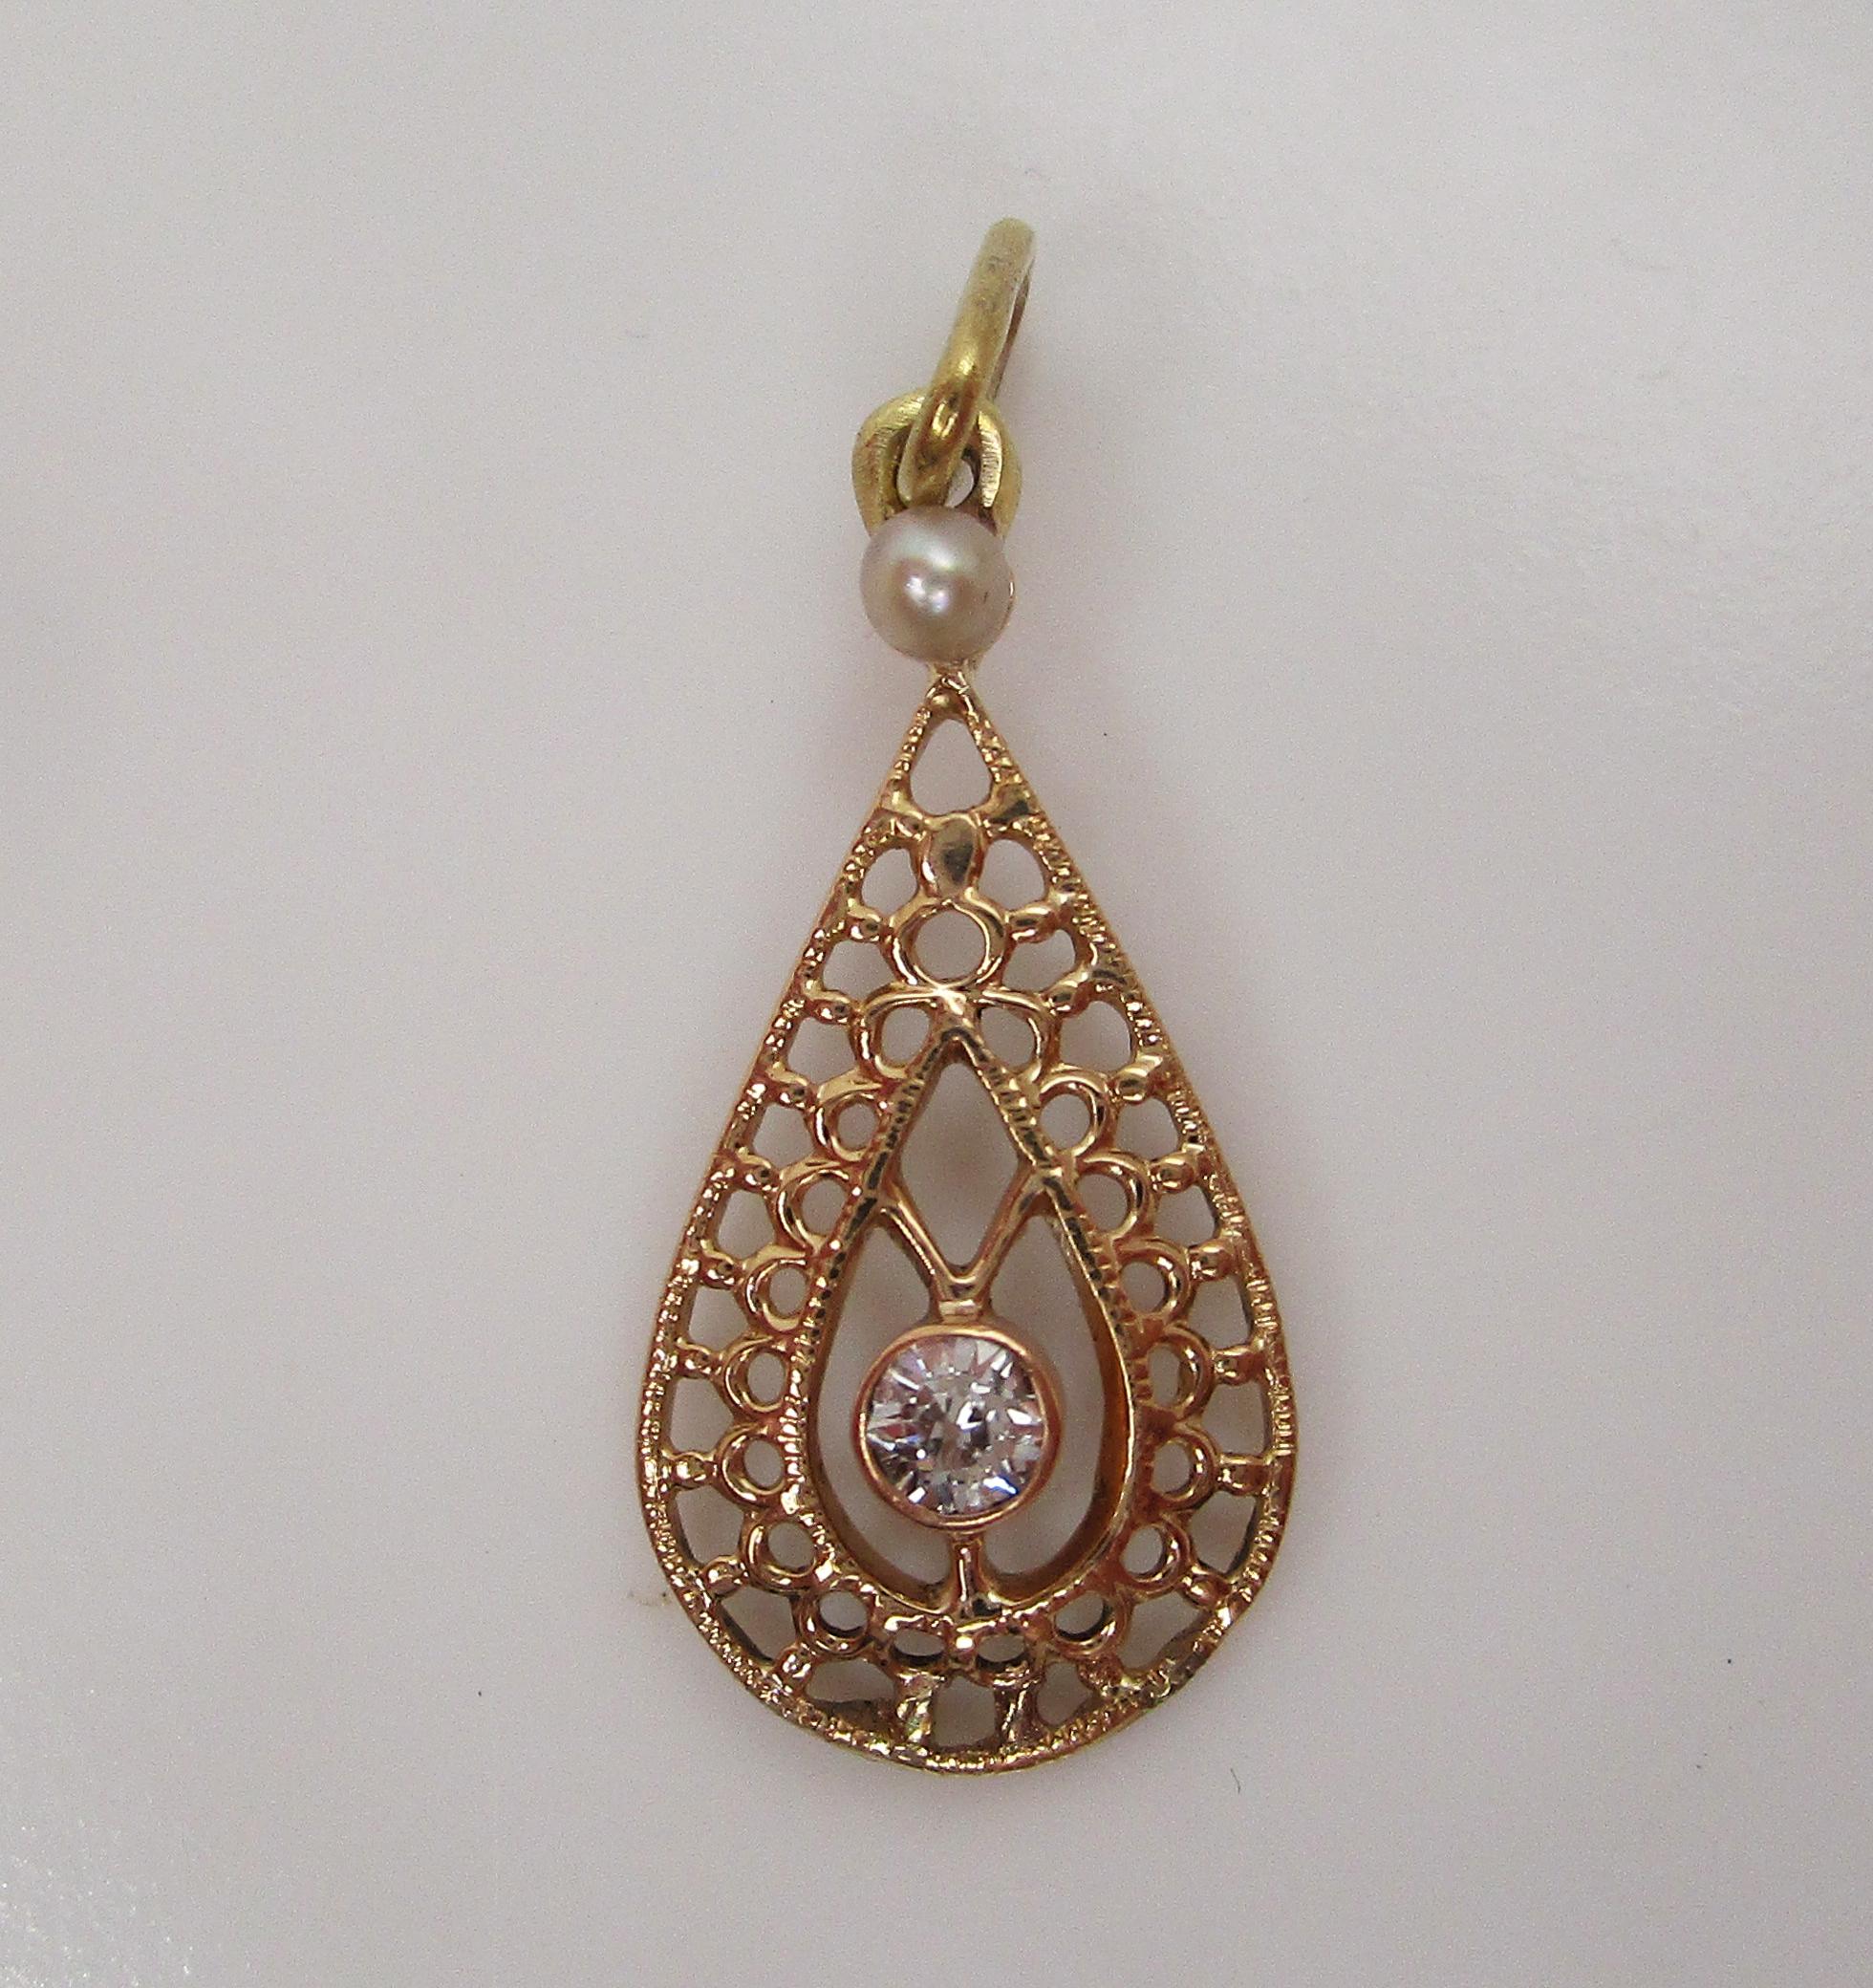 This lovely Edwardian pendant is in 14k yellow gold and features both a seed pearl and delicate diamond accent in an open pear design! The open design of the pendant creates a lacy look that is delicate and beautiful! At the top of the pendant sits